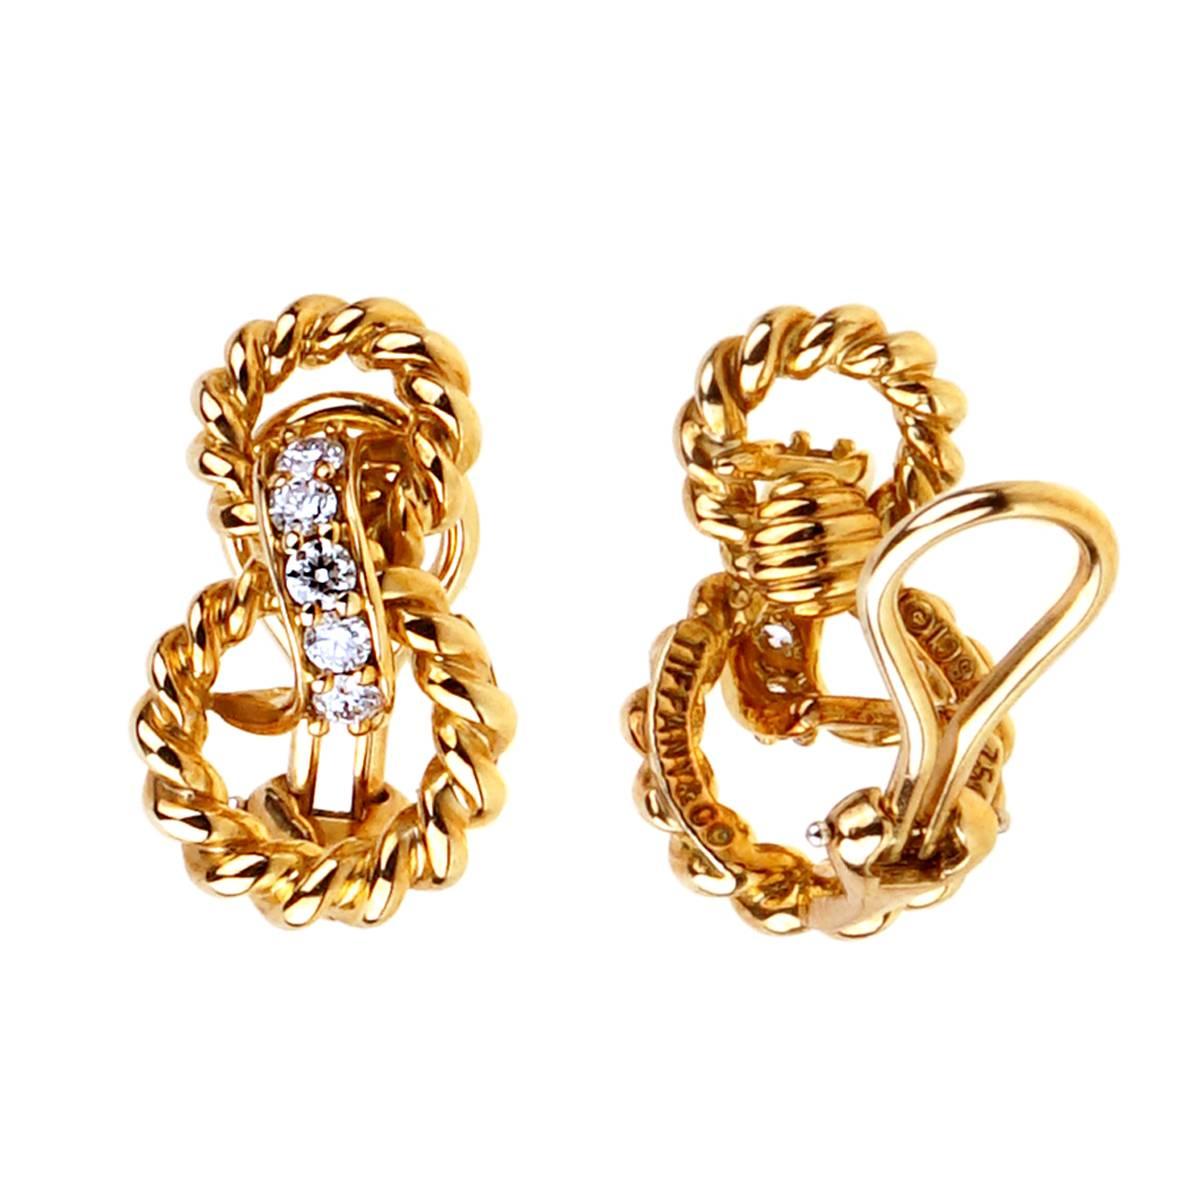 A fabulous pair of Tiffany & Co earrings circa 1990's featuring a braided 18k yellow gold design accompanied with 10 of the finest Tiffany & Co round brilliant cut diamonds. The earrings measure .75